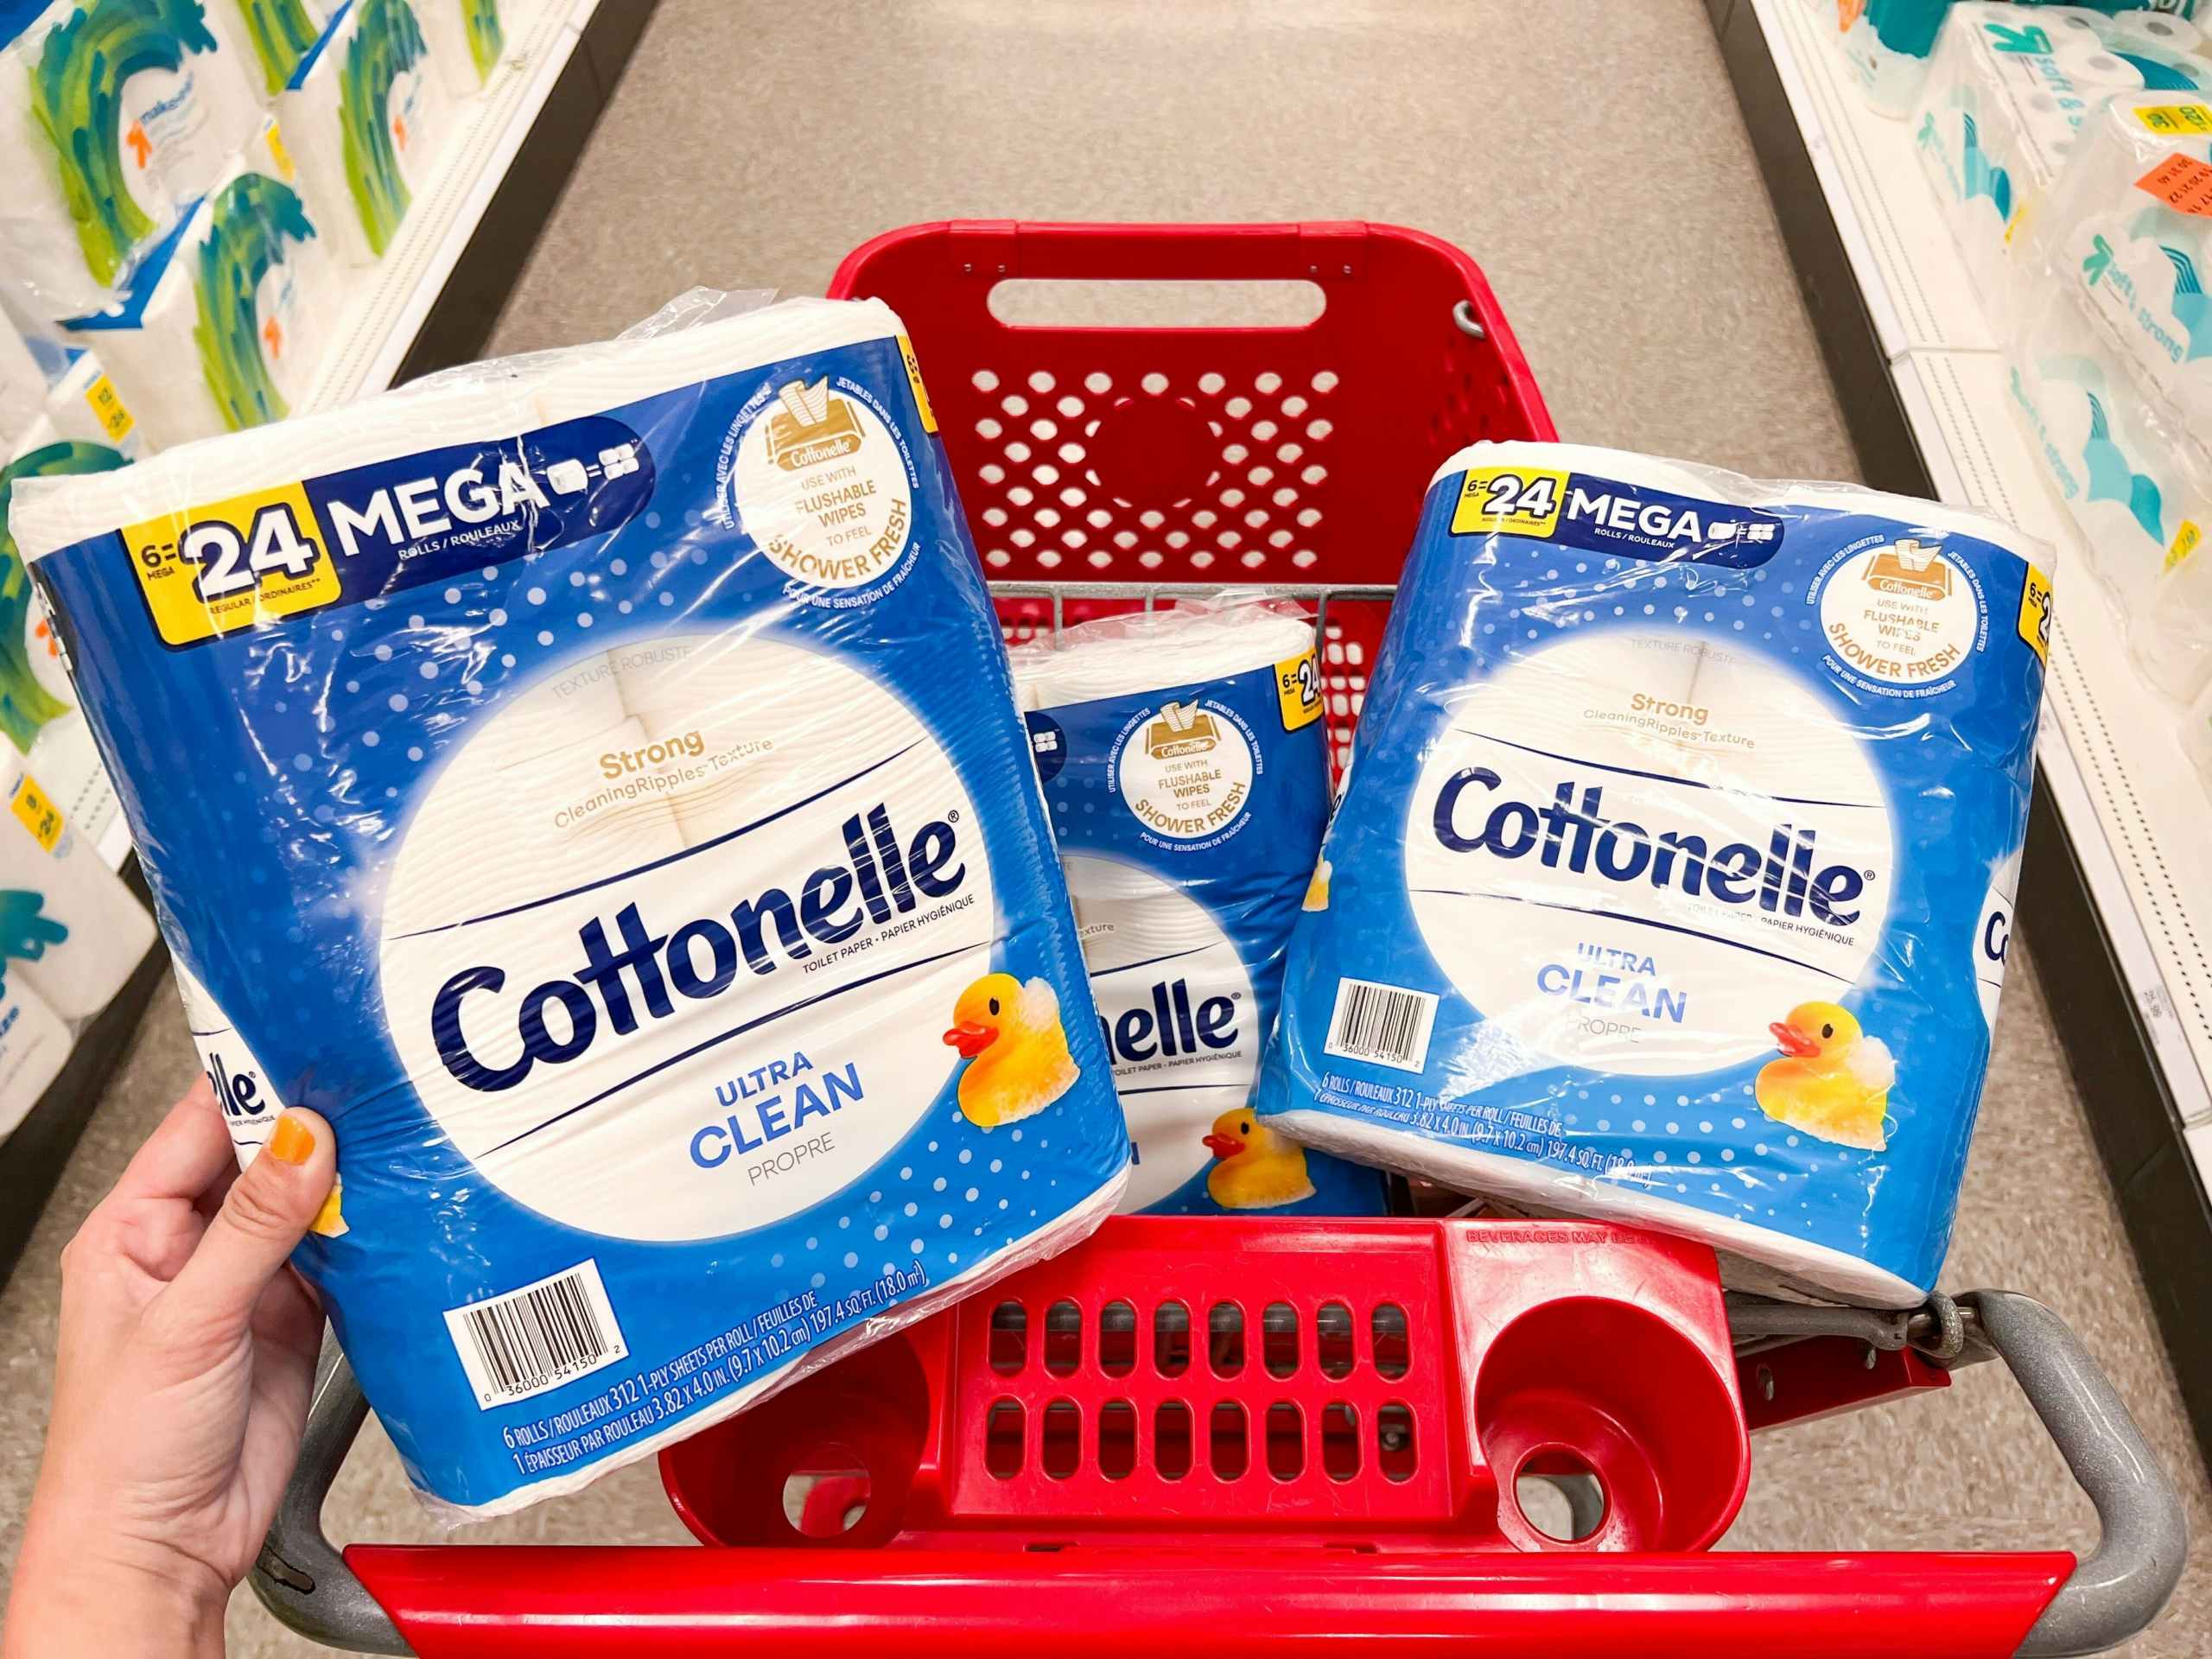 cottonelle toilet paper in a target cart